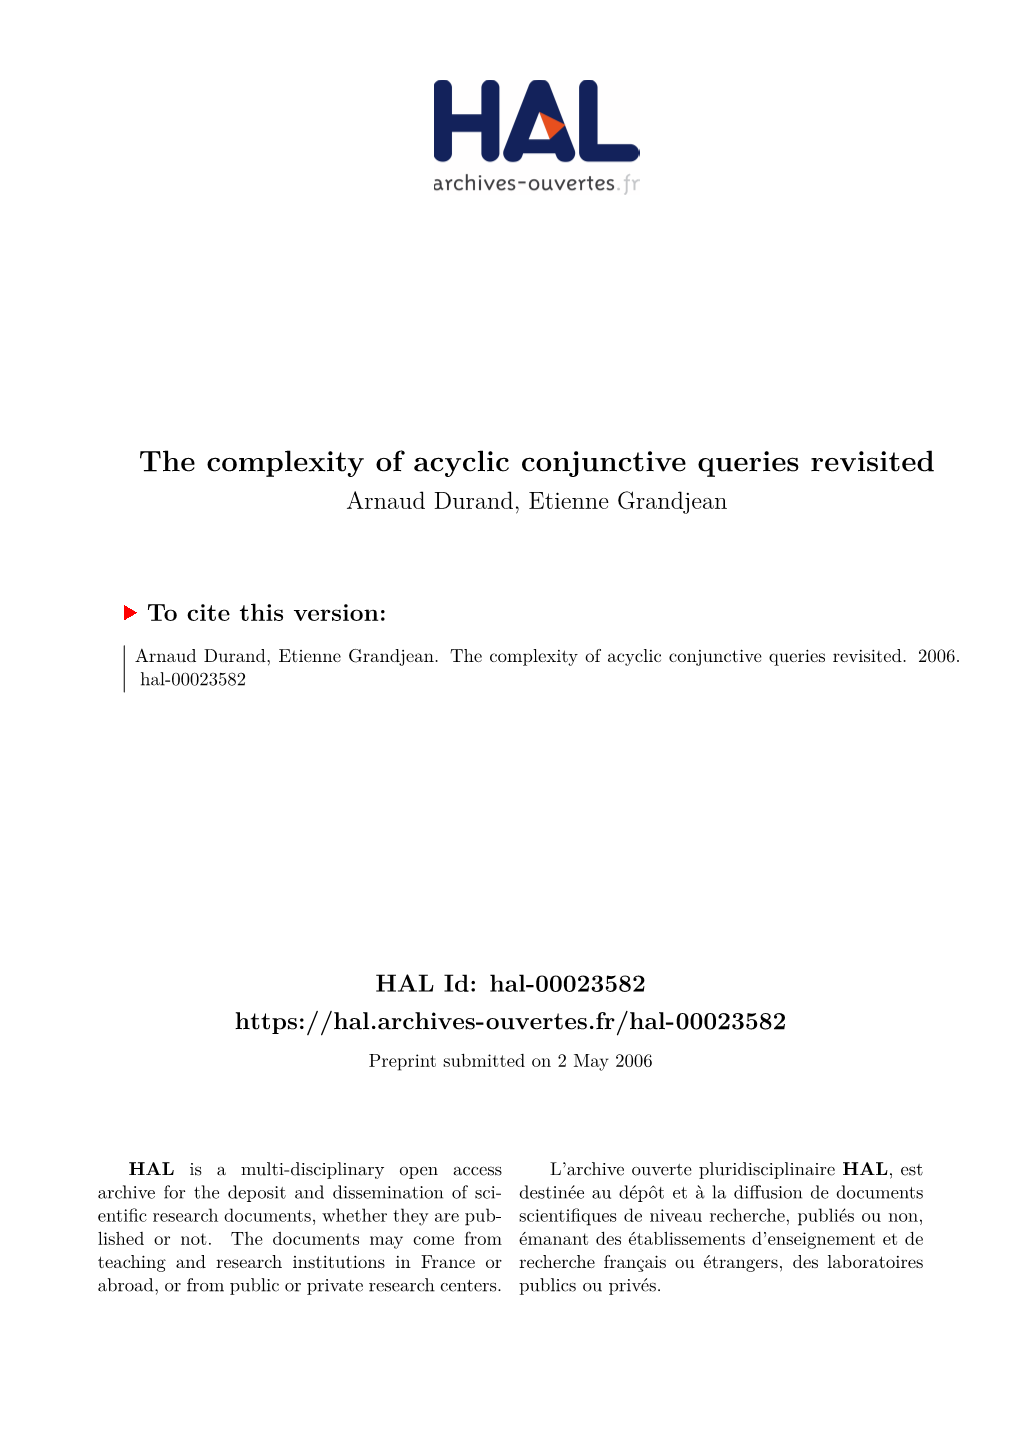 The Complexity of Acyclic Conjunctive Queries Revisited Arnaud Durand, Etienne Grandjean